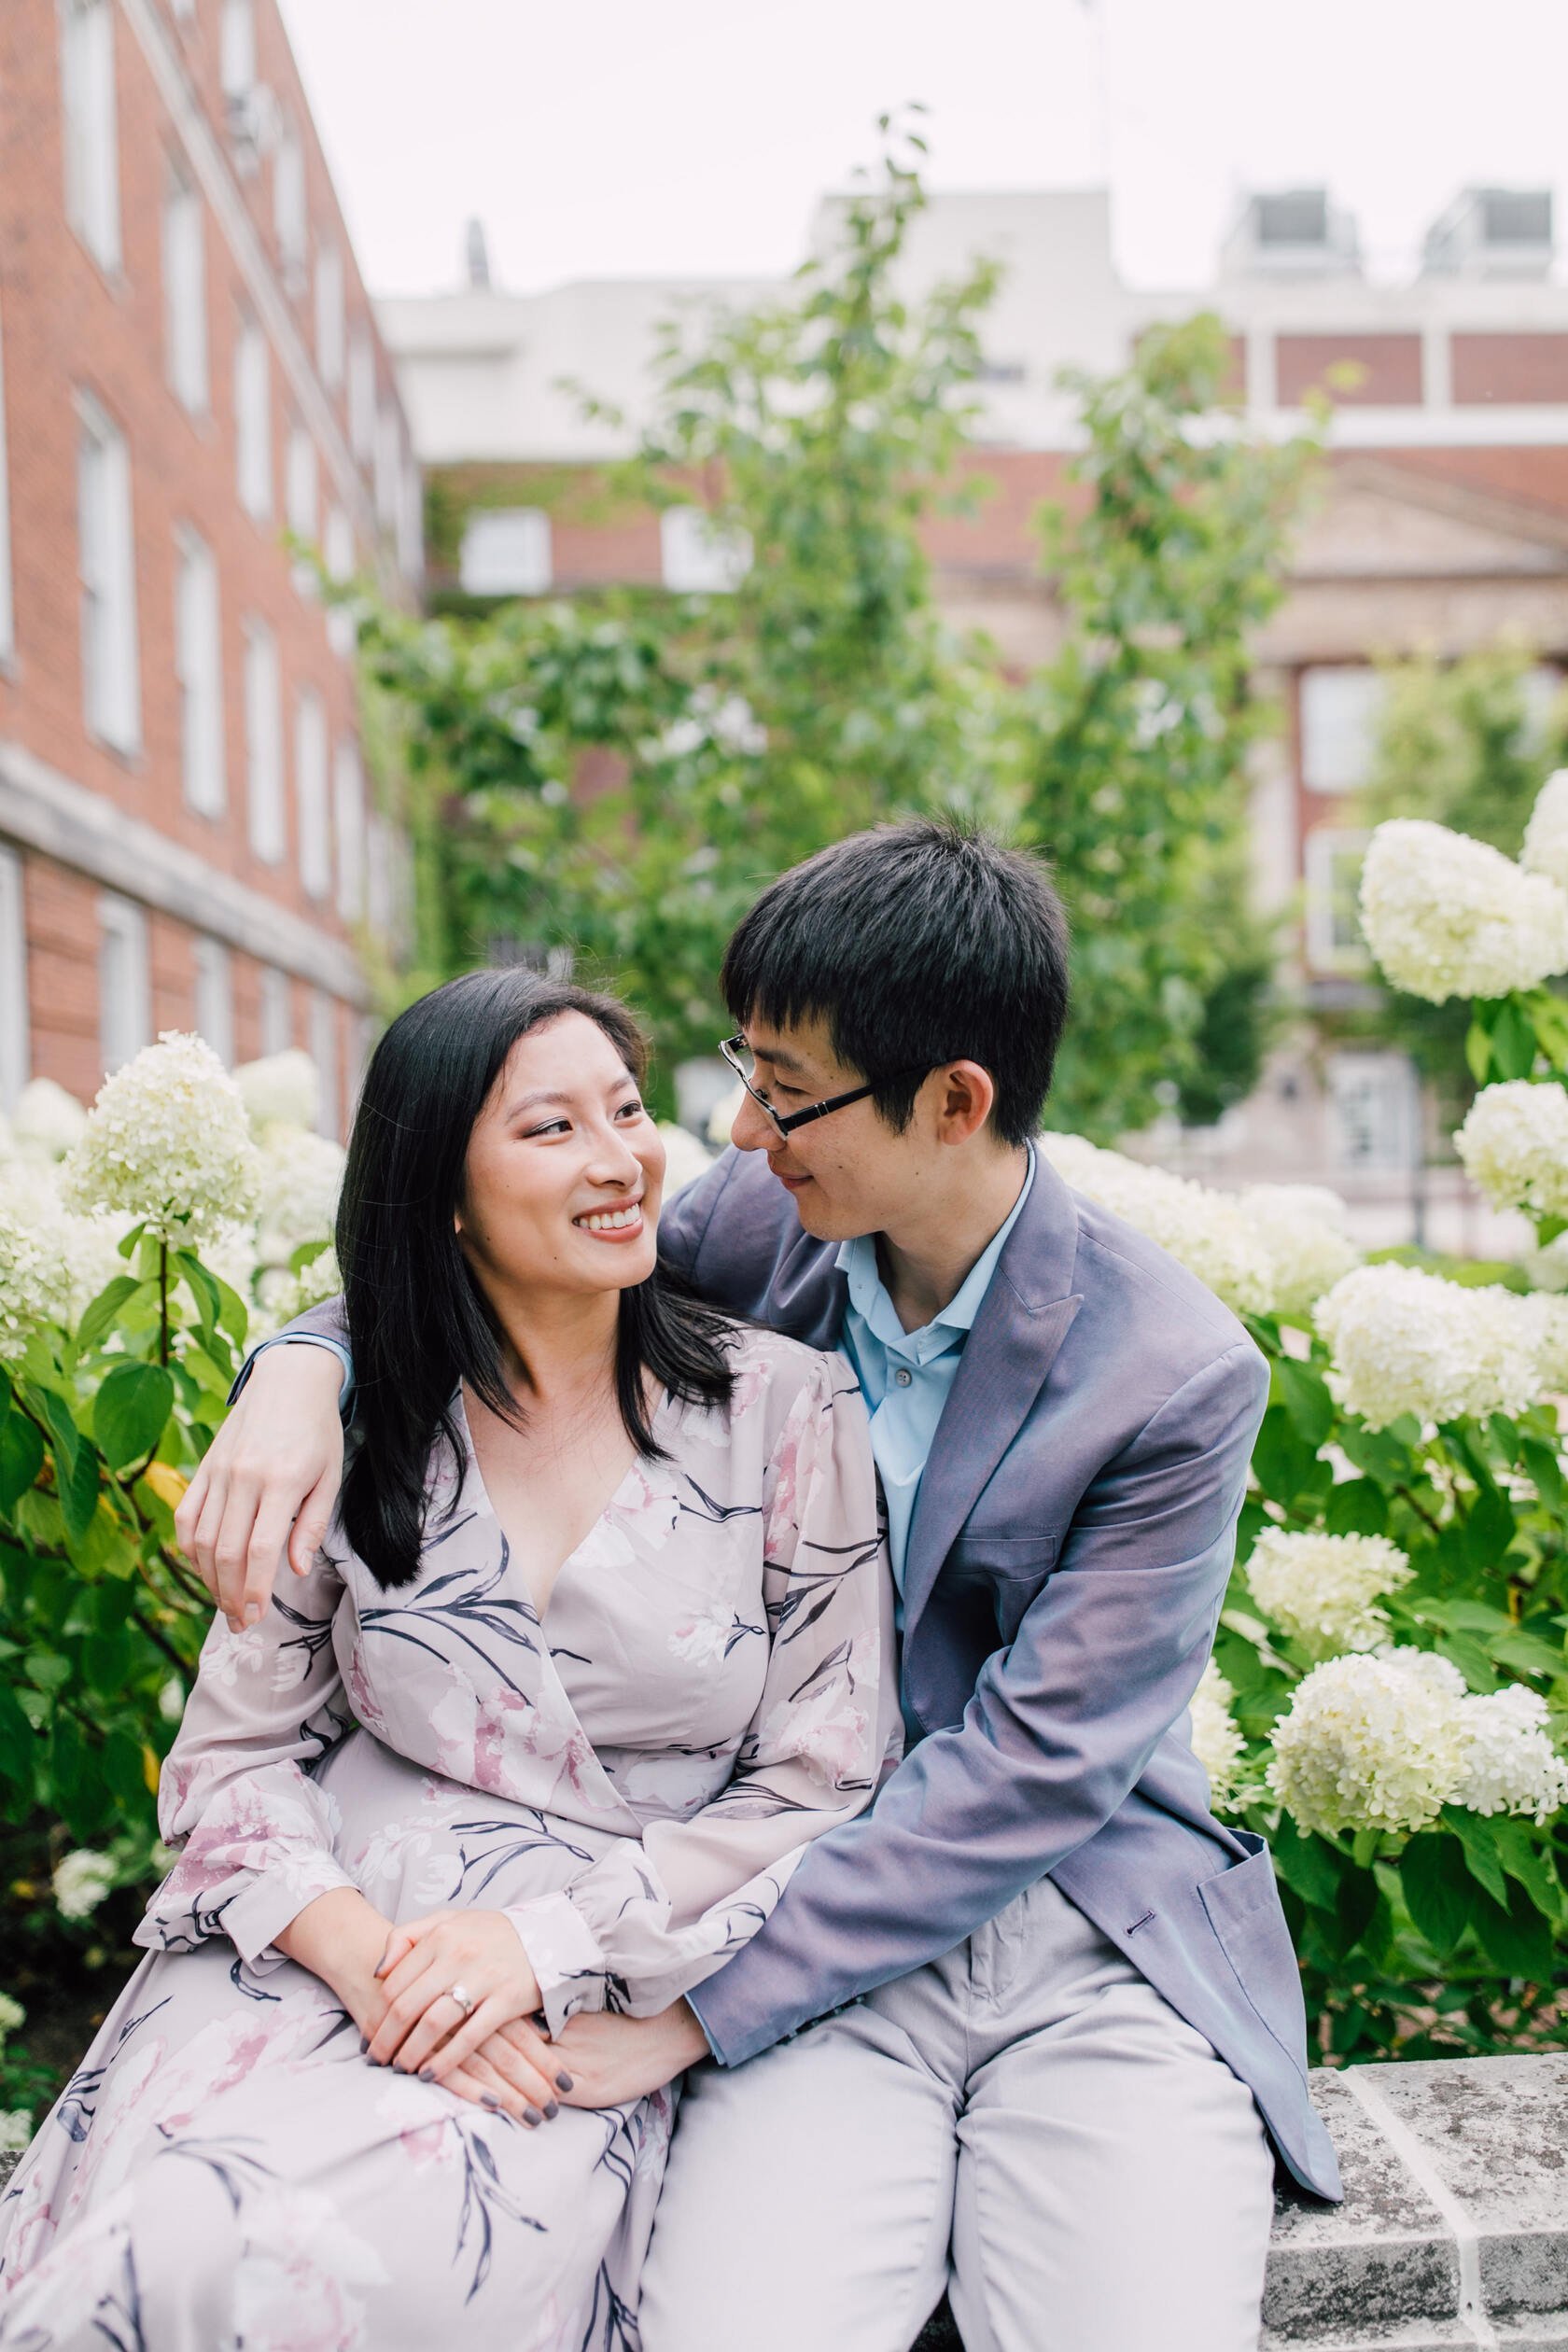  Engaged couple smile at each other in front of hydrangea bushes, engagement photography 